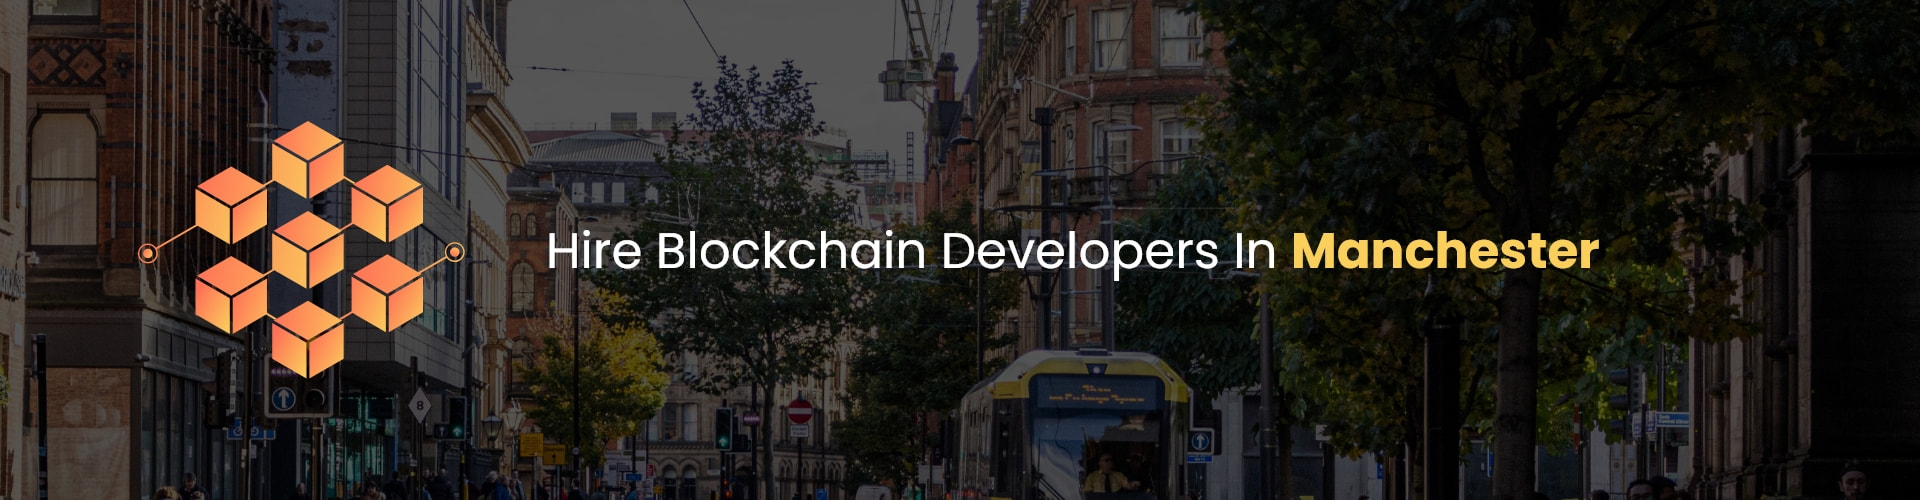 hire blockchain developers in manchester